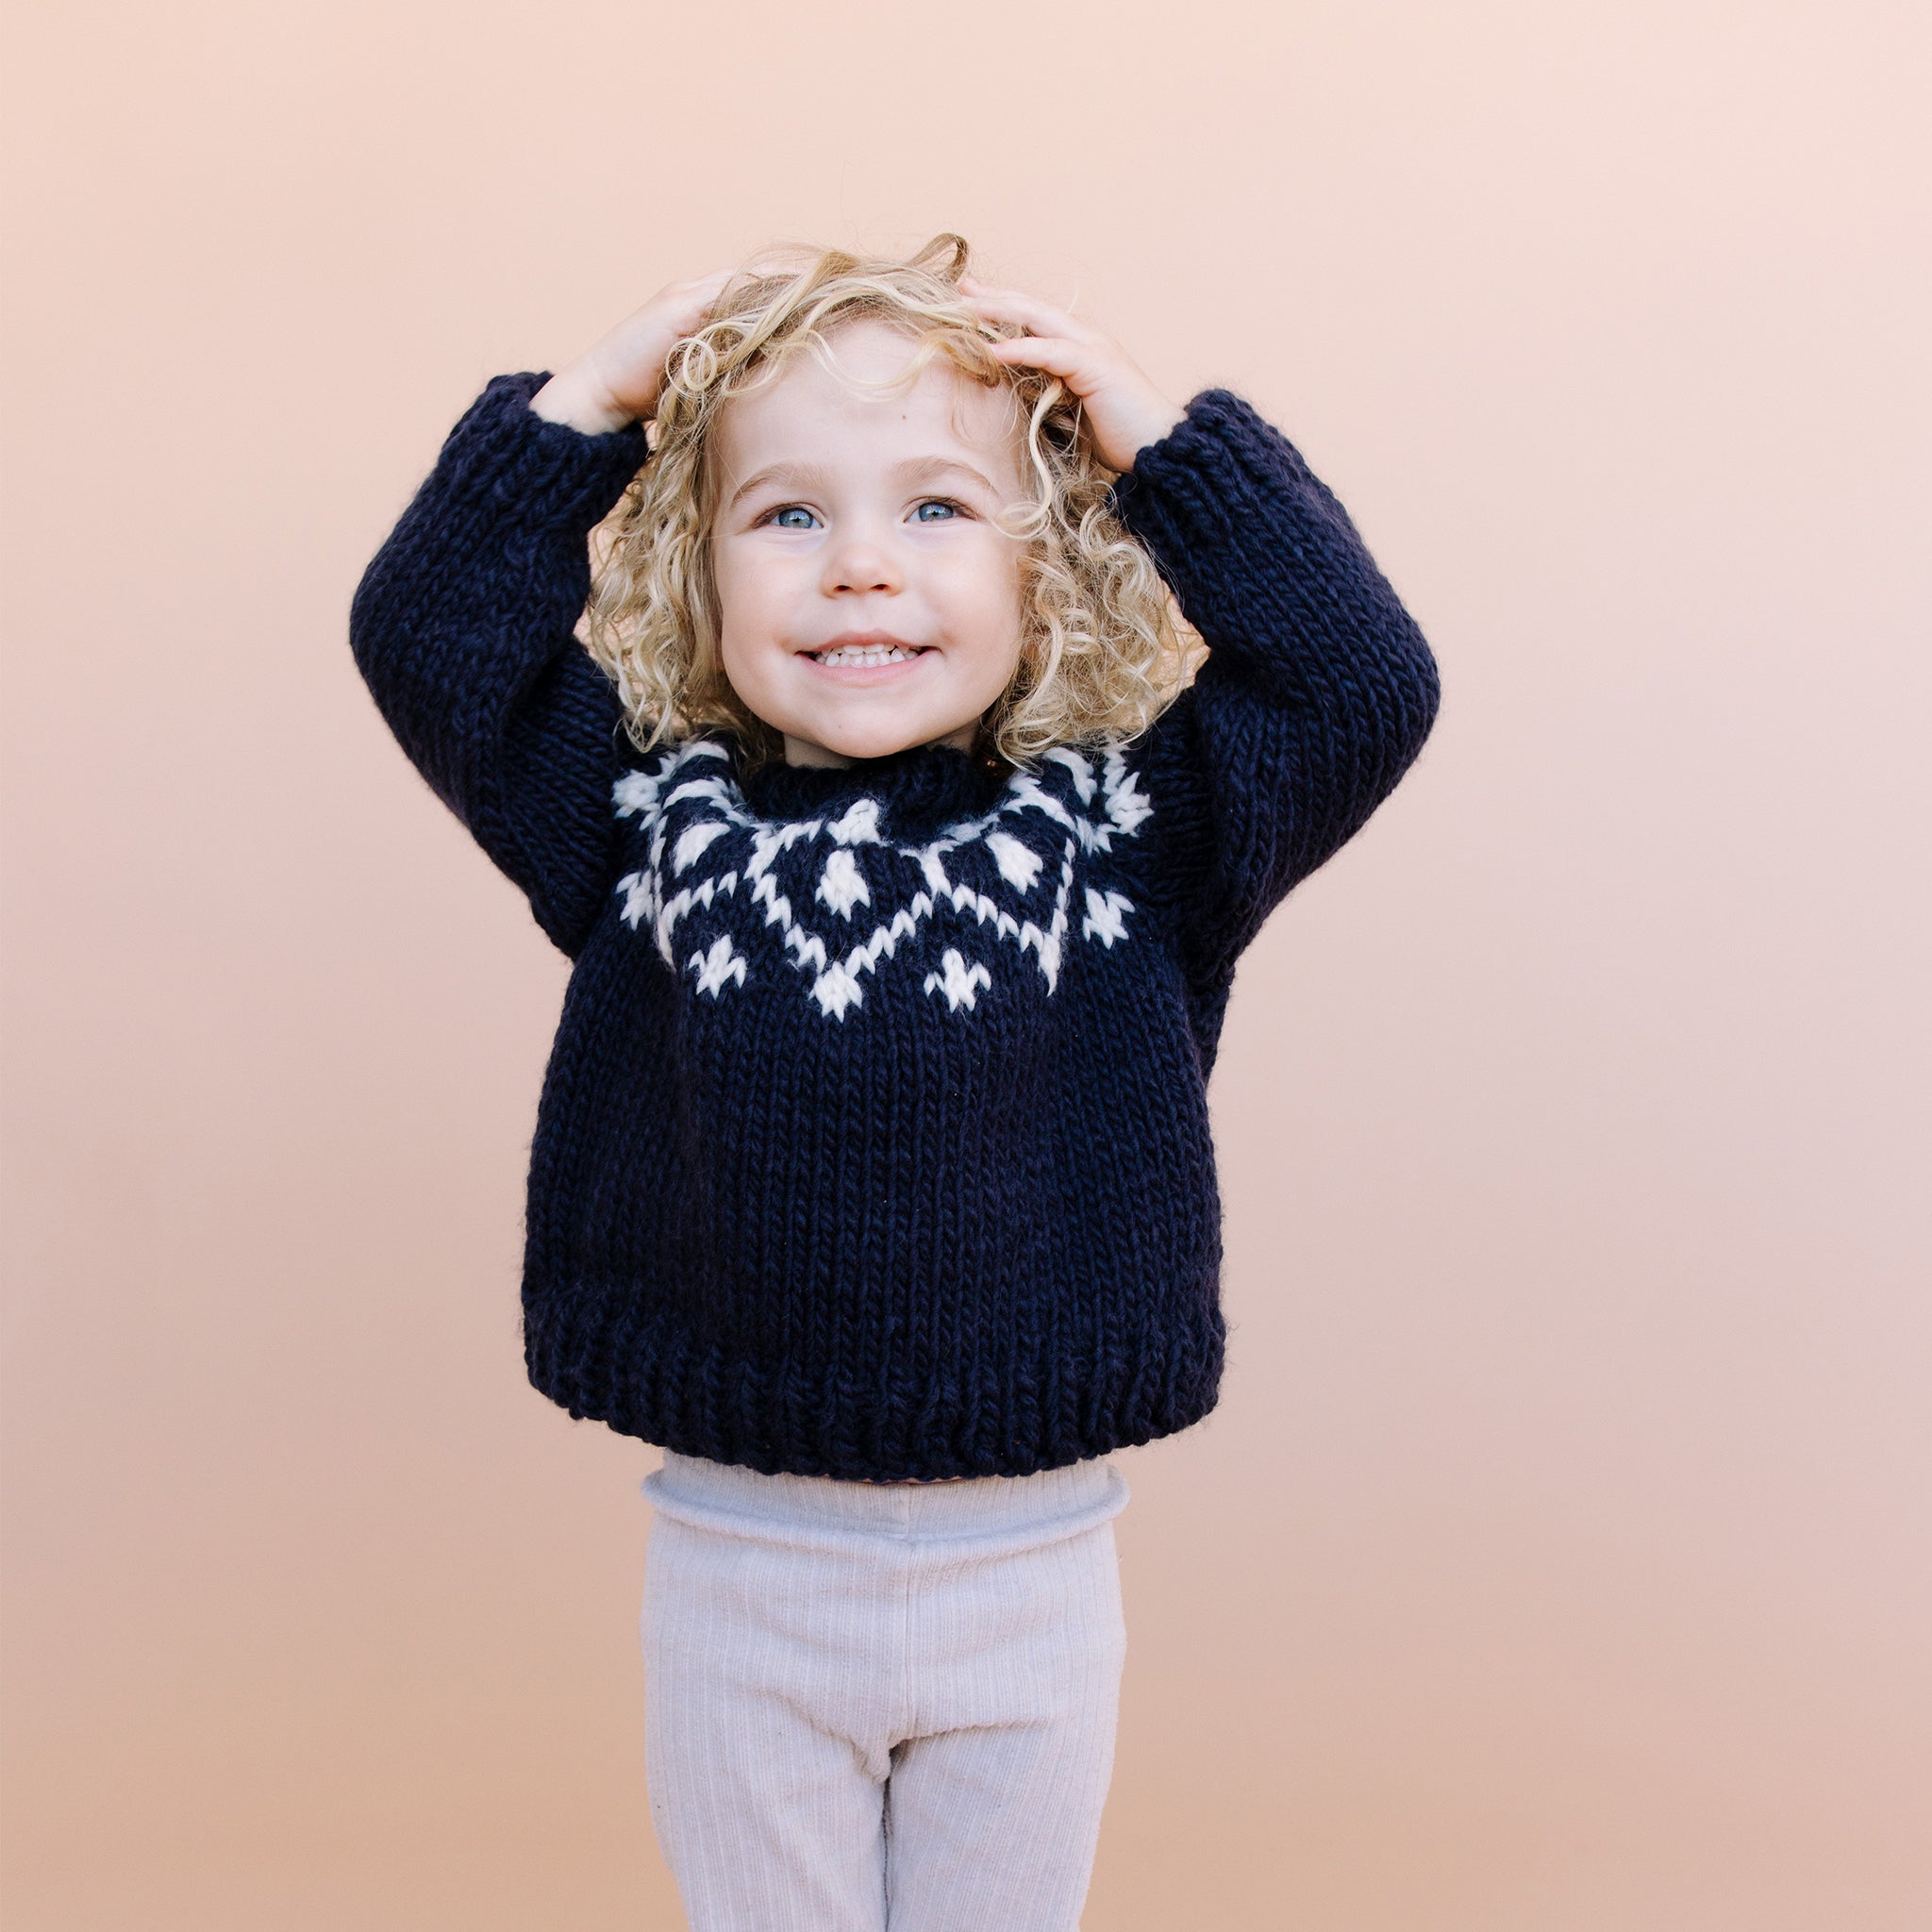 The Blueberry Hill | Hats for babies, toddlers, and kids